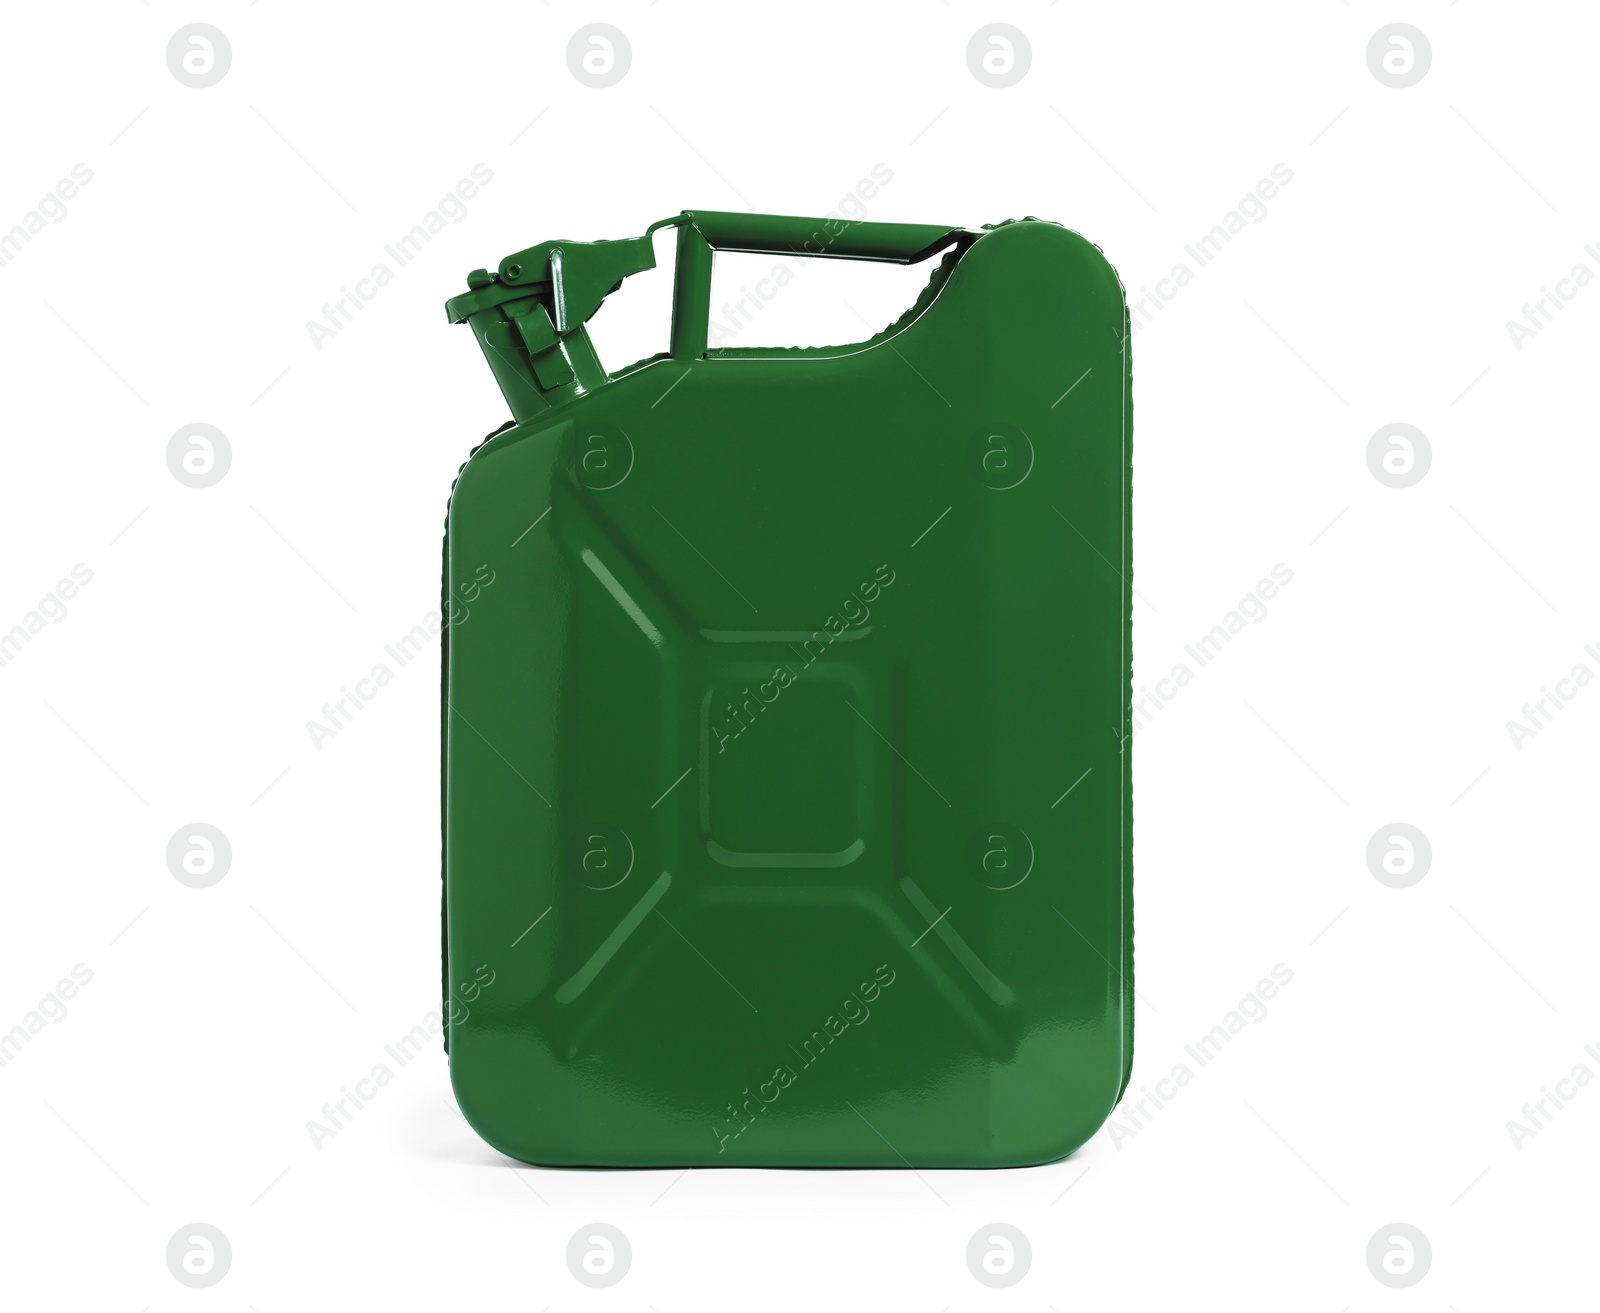 Photo of New khaki metal canister isolated on white